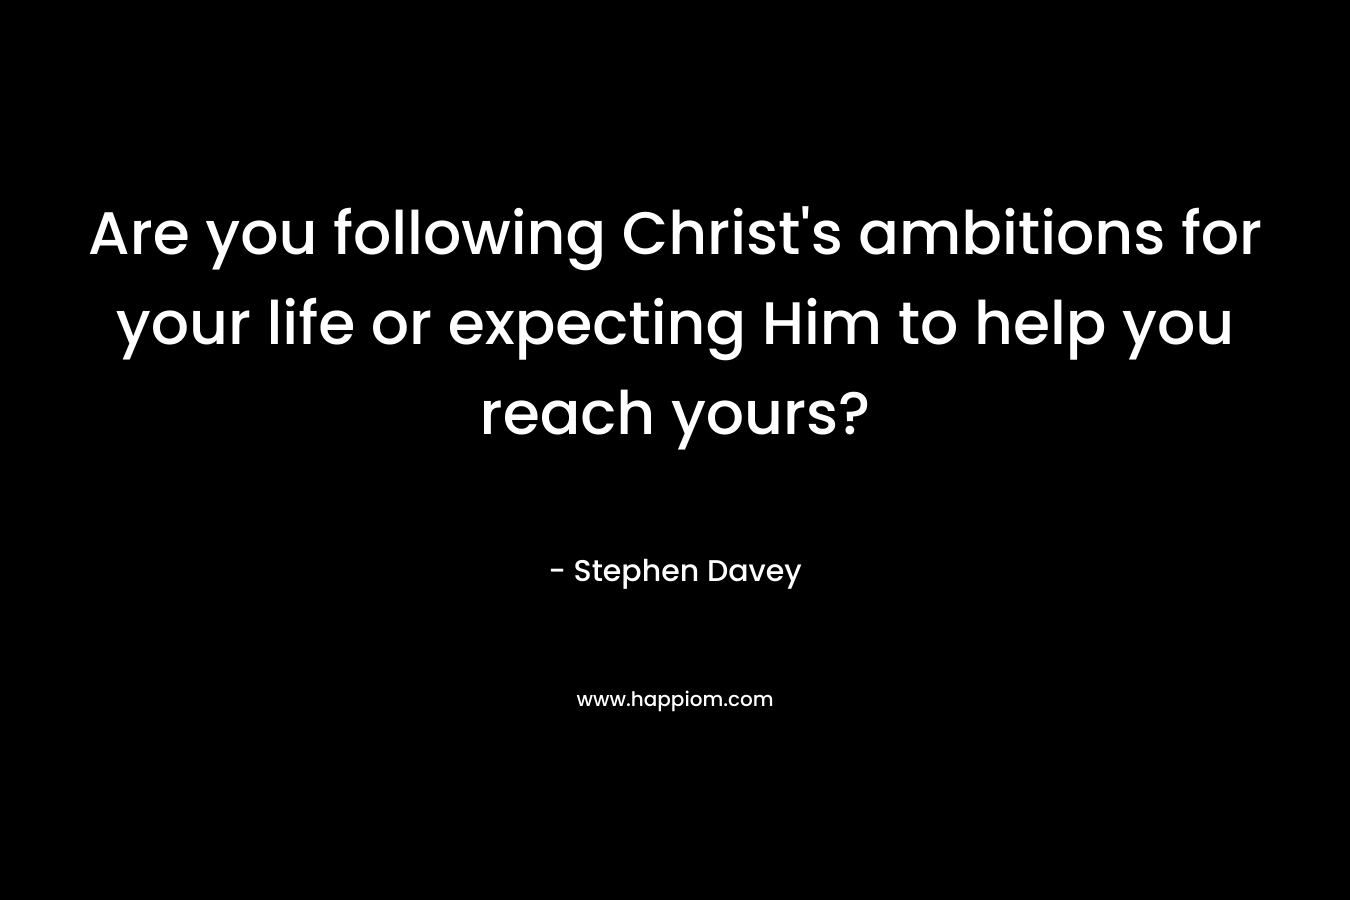 Are you following Christ’s ambitions for your life or expecting Him to help you reach yours? – Stephen Davey